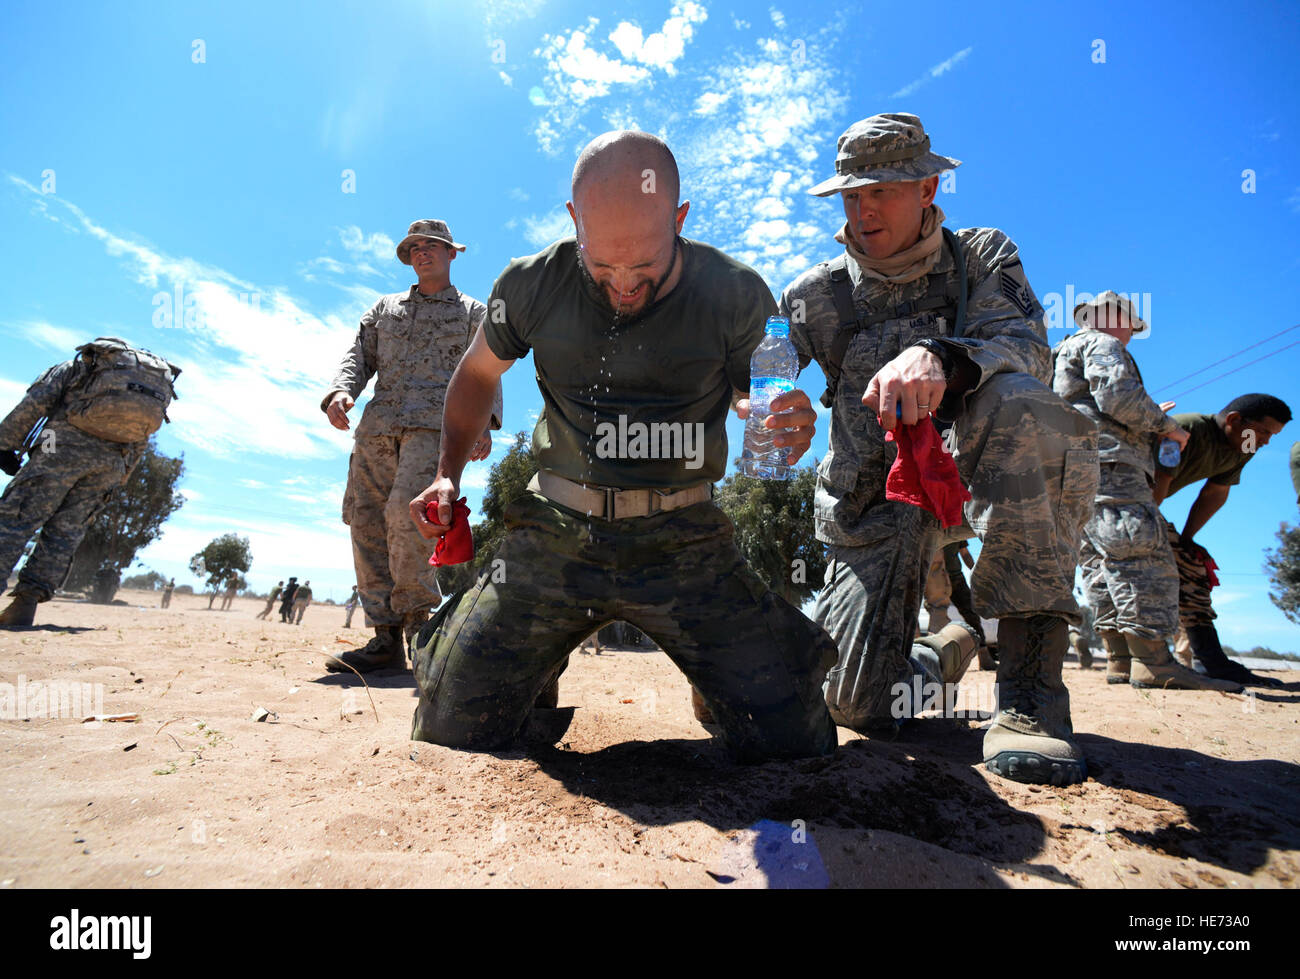 A Spanish Legion soldier recovers with the help of a U.S. Air Force master sergeant after being exposed to Oleoresin Capsicum 'pepper' spray during a non-lethal weapons class as a part of AFRICAN LION 16 at Tifnit, Kingdom of Morocco, April 23, 2016. Of the 11 nations participating in the annual exercise, a group of U.S. military members, Royal Moroccan armed forces members, Spanish Legion soldiers and Royal Netherlands army soldiers lived in field conditions and participated in daily familiarization with other nation’s tactics to improve interoperability.  Senior Airman Krystal Ardrey Stock Photo